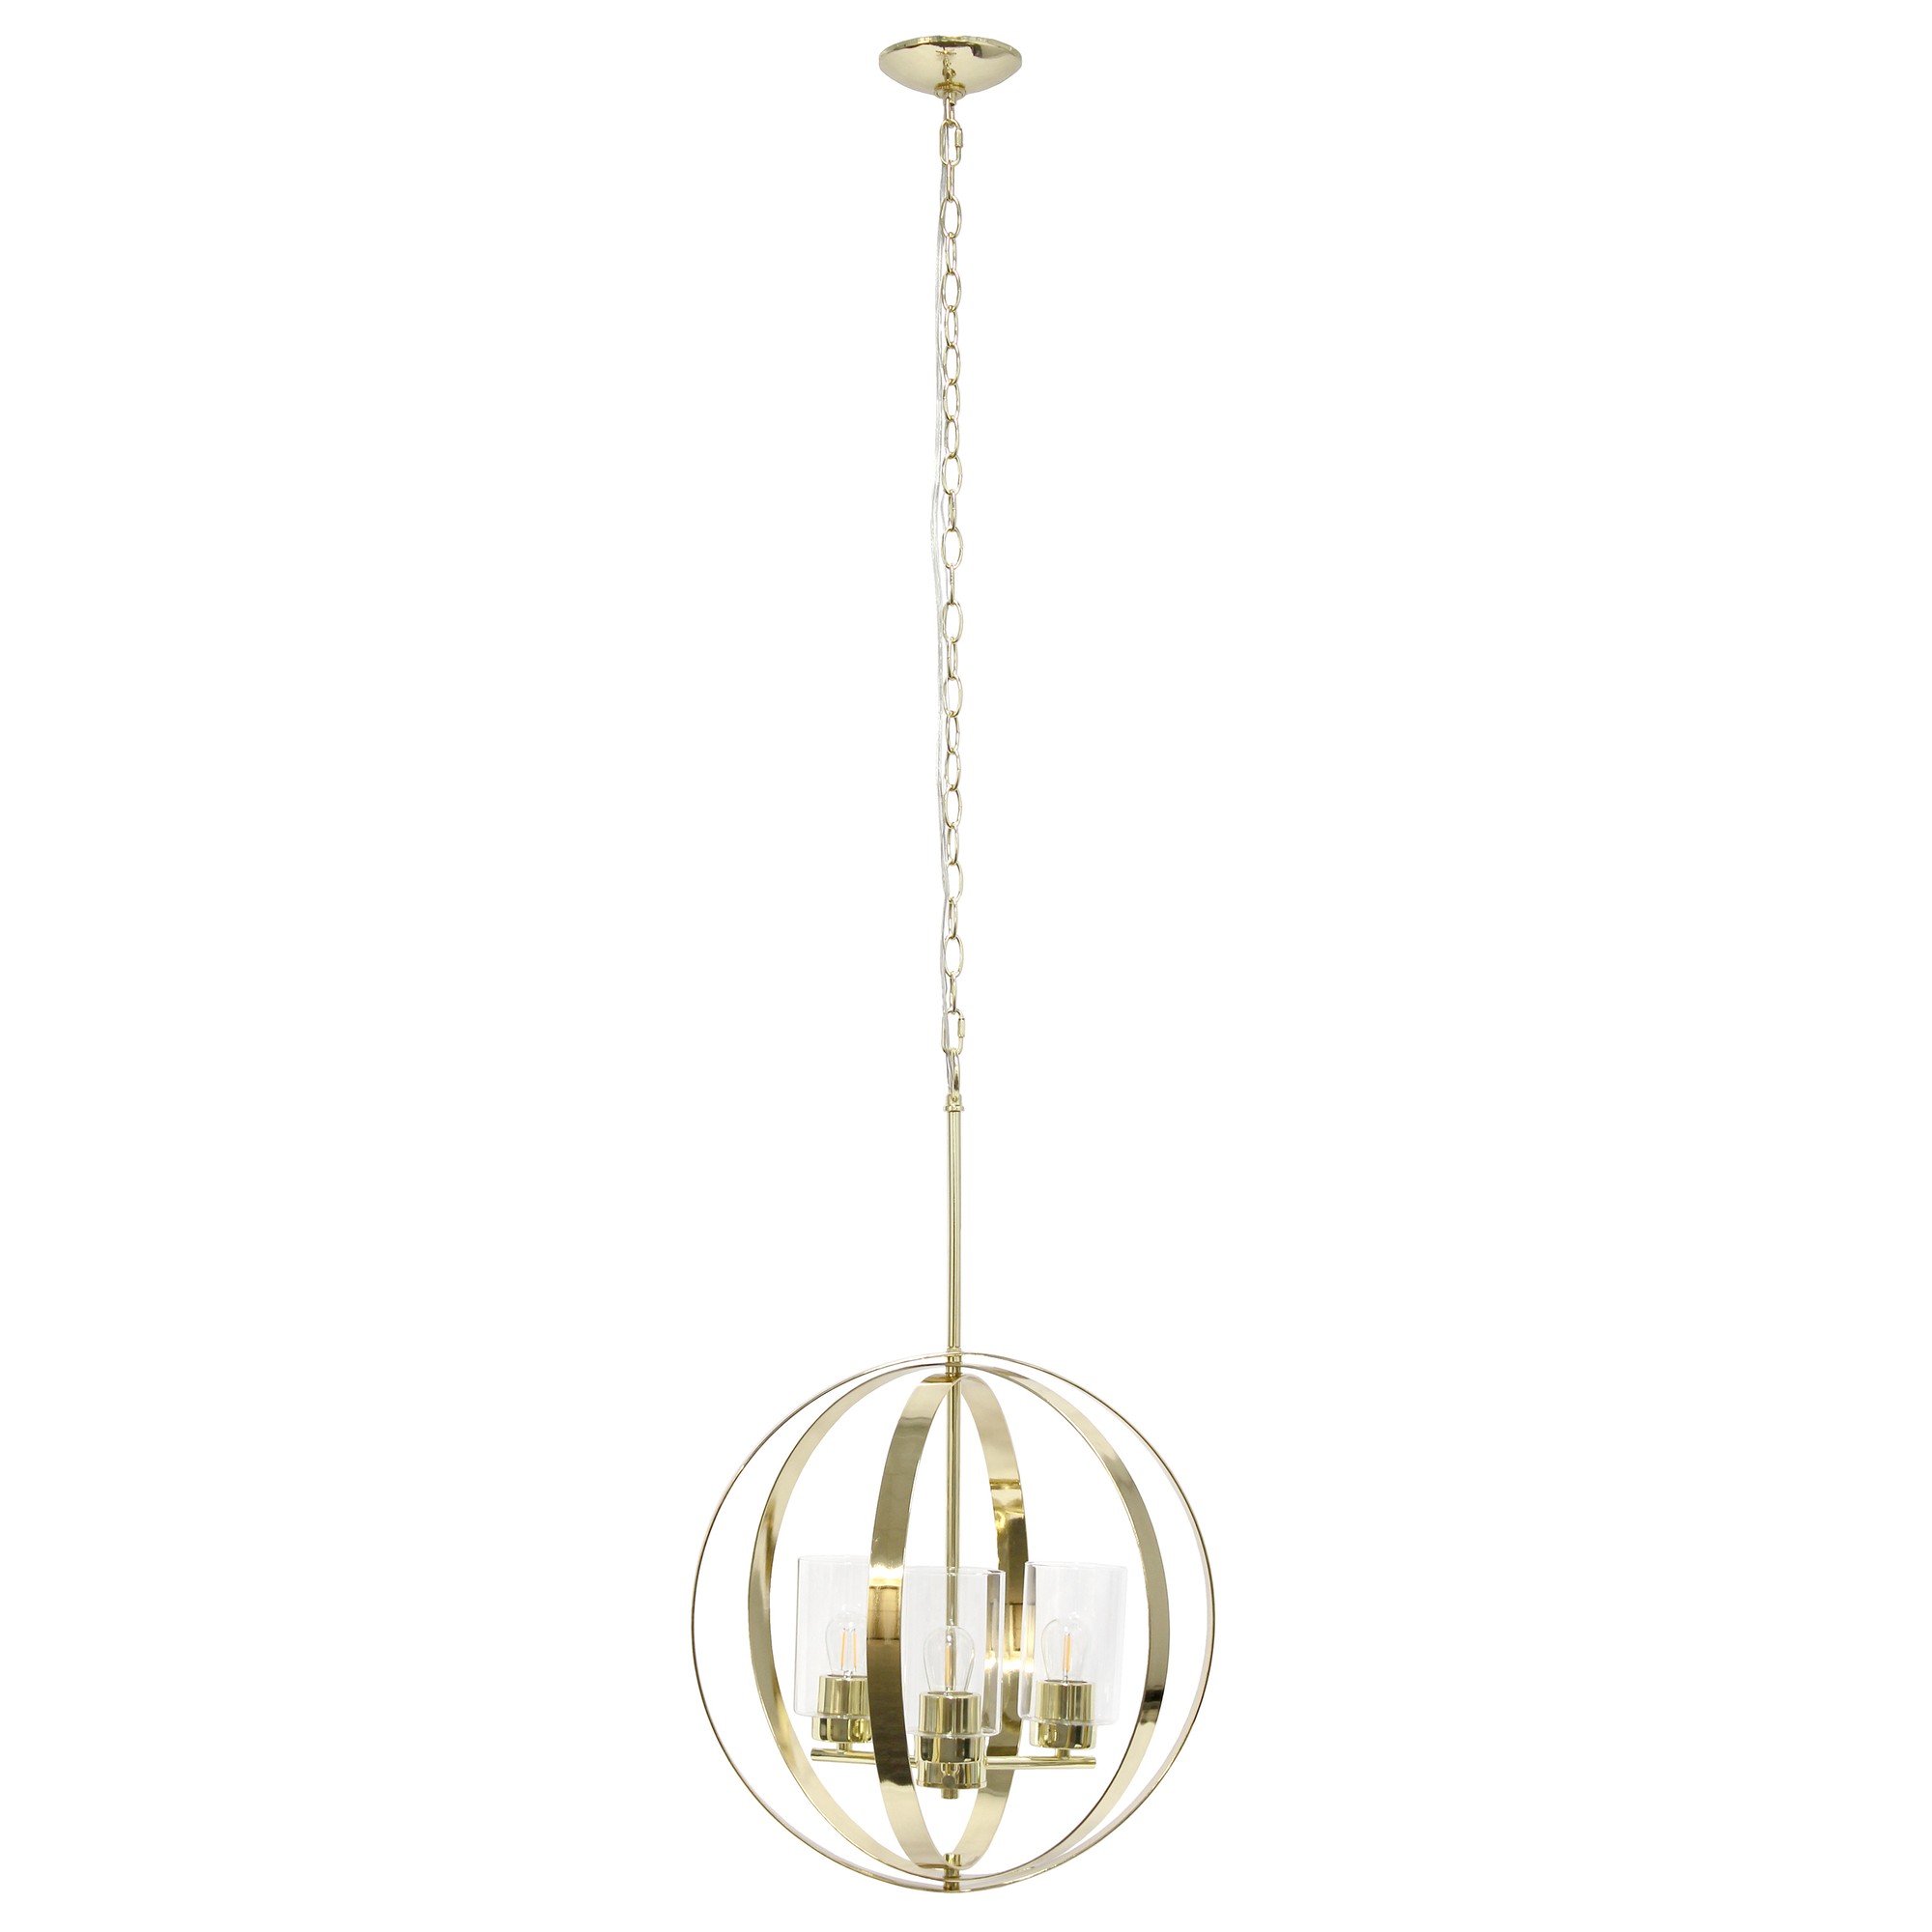 Lalia Home 3-Light 18" Adjustable Industrial Globe Hanging Metal and Clear Glass Ceiling Pendant, Gold